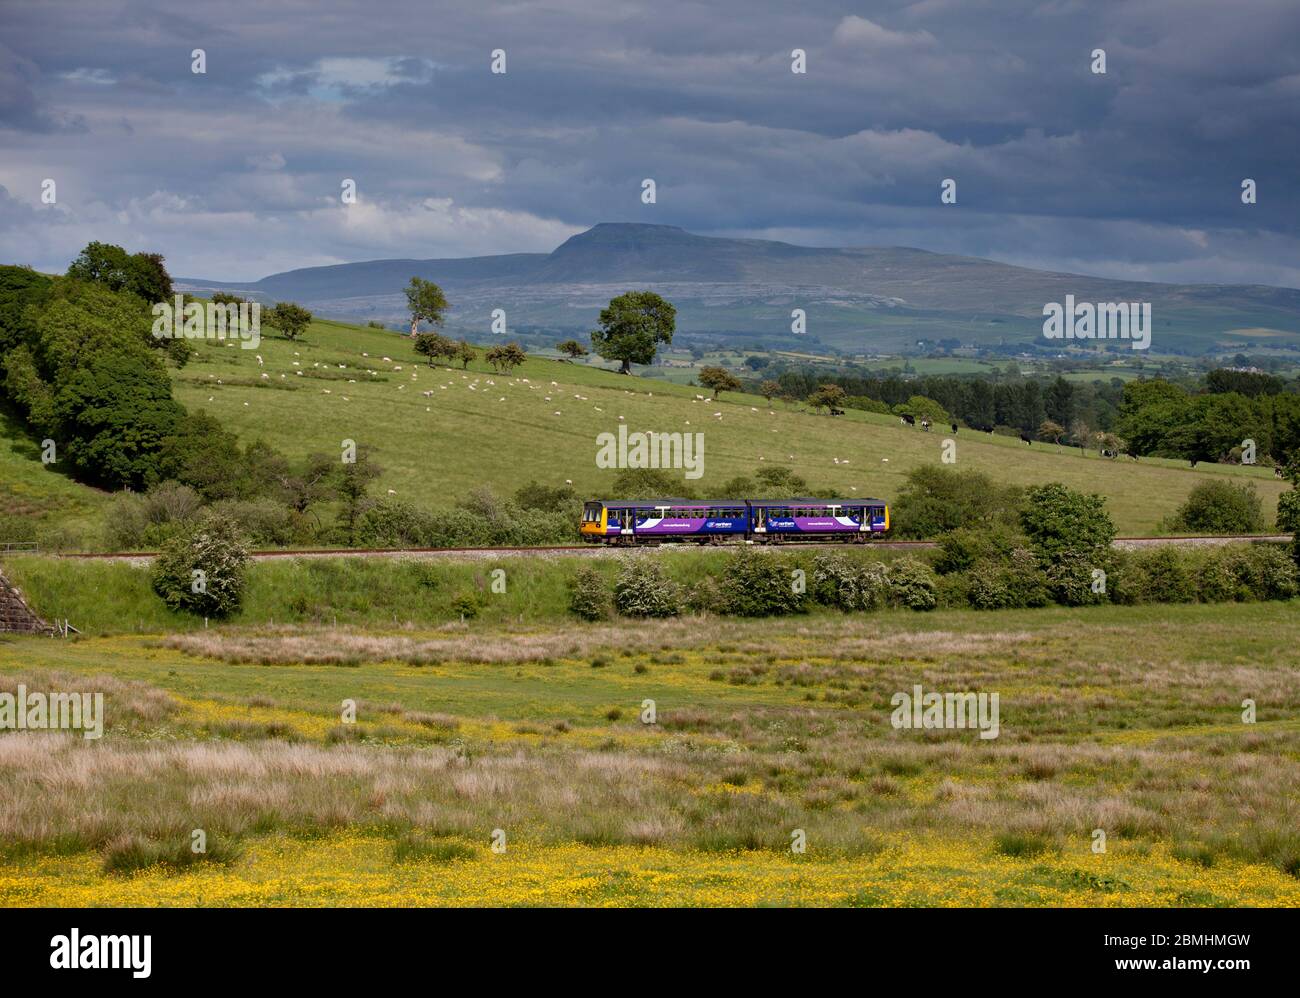 Northern rail class 142 pacer train passing the countryside at Arkholme on the scenic 'little north western' railway line with Ingleborough behind Stock Photo